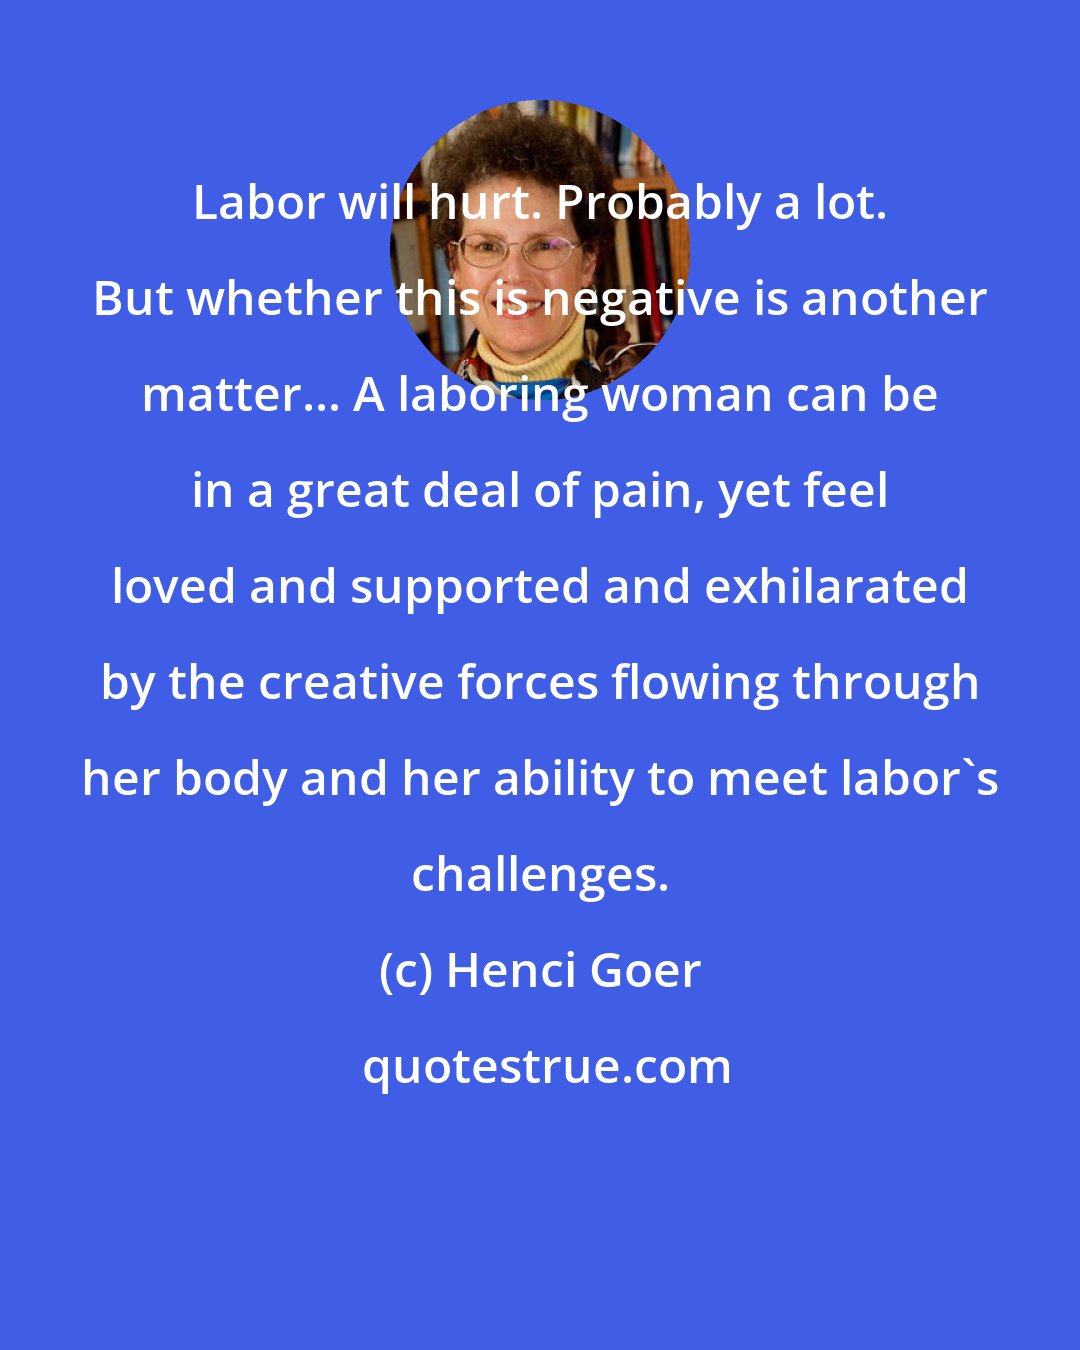 Henci Goer: Labor will hurt. Probably a lot. But whether this is negative is another matter... A laboring woman can be in a great deal of pain, yet feel loved and supported and exhilarated by the creative forces flowing through her body and her ability to meet labor's challenges.